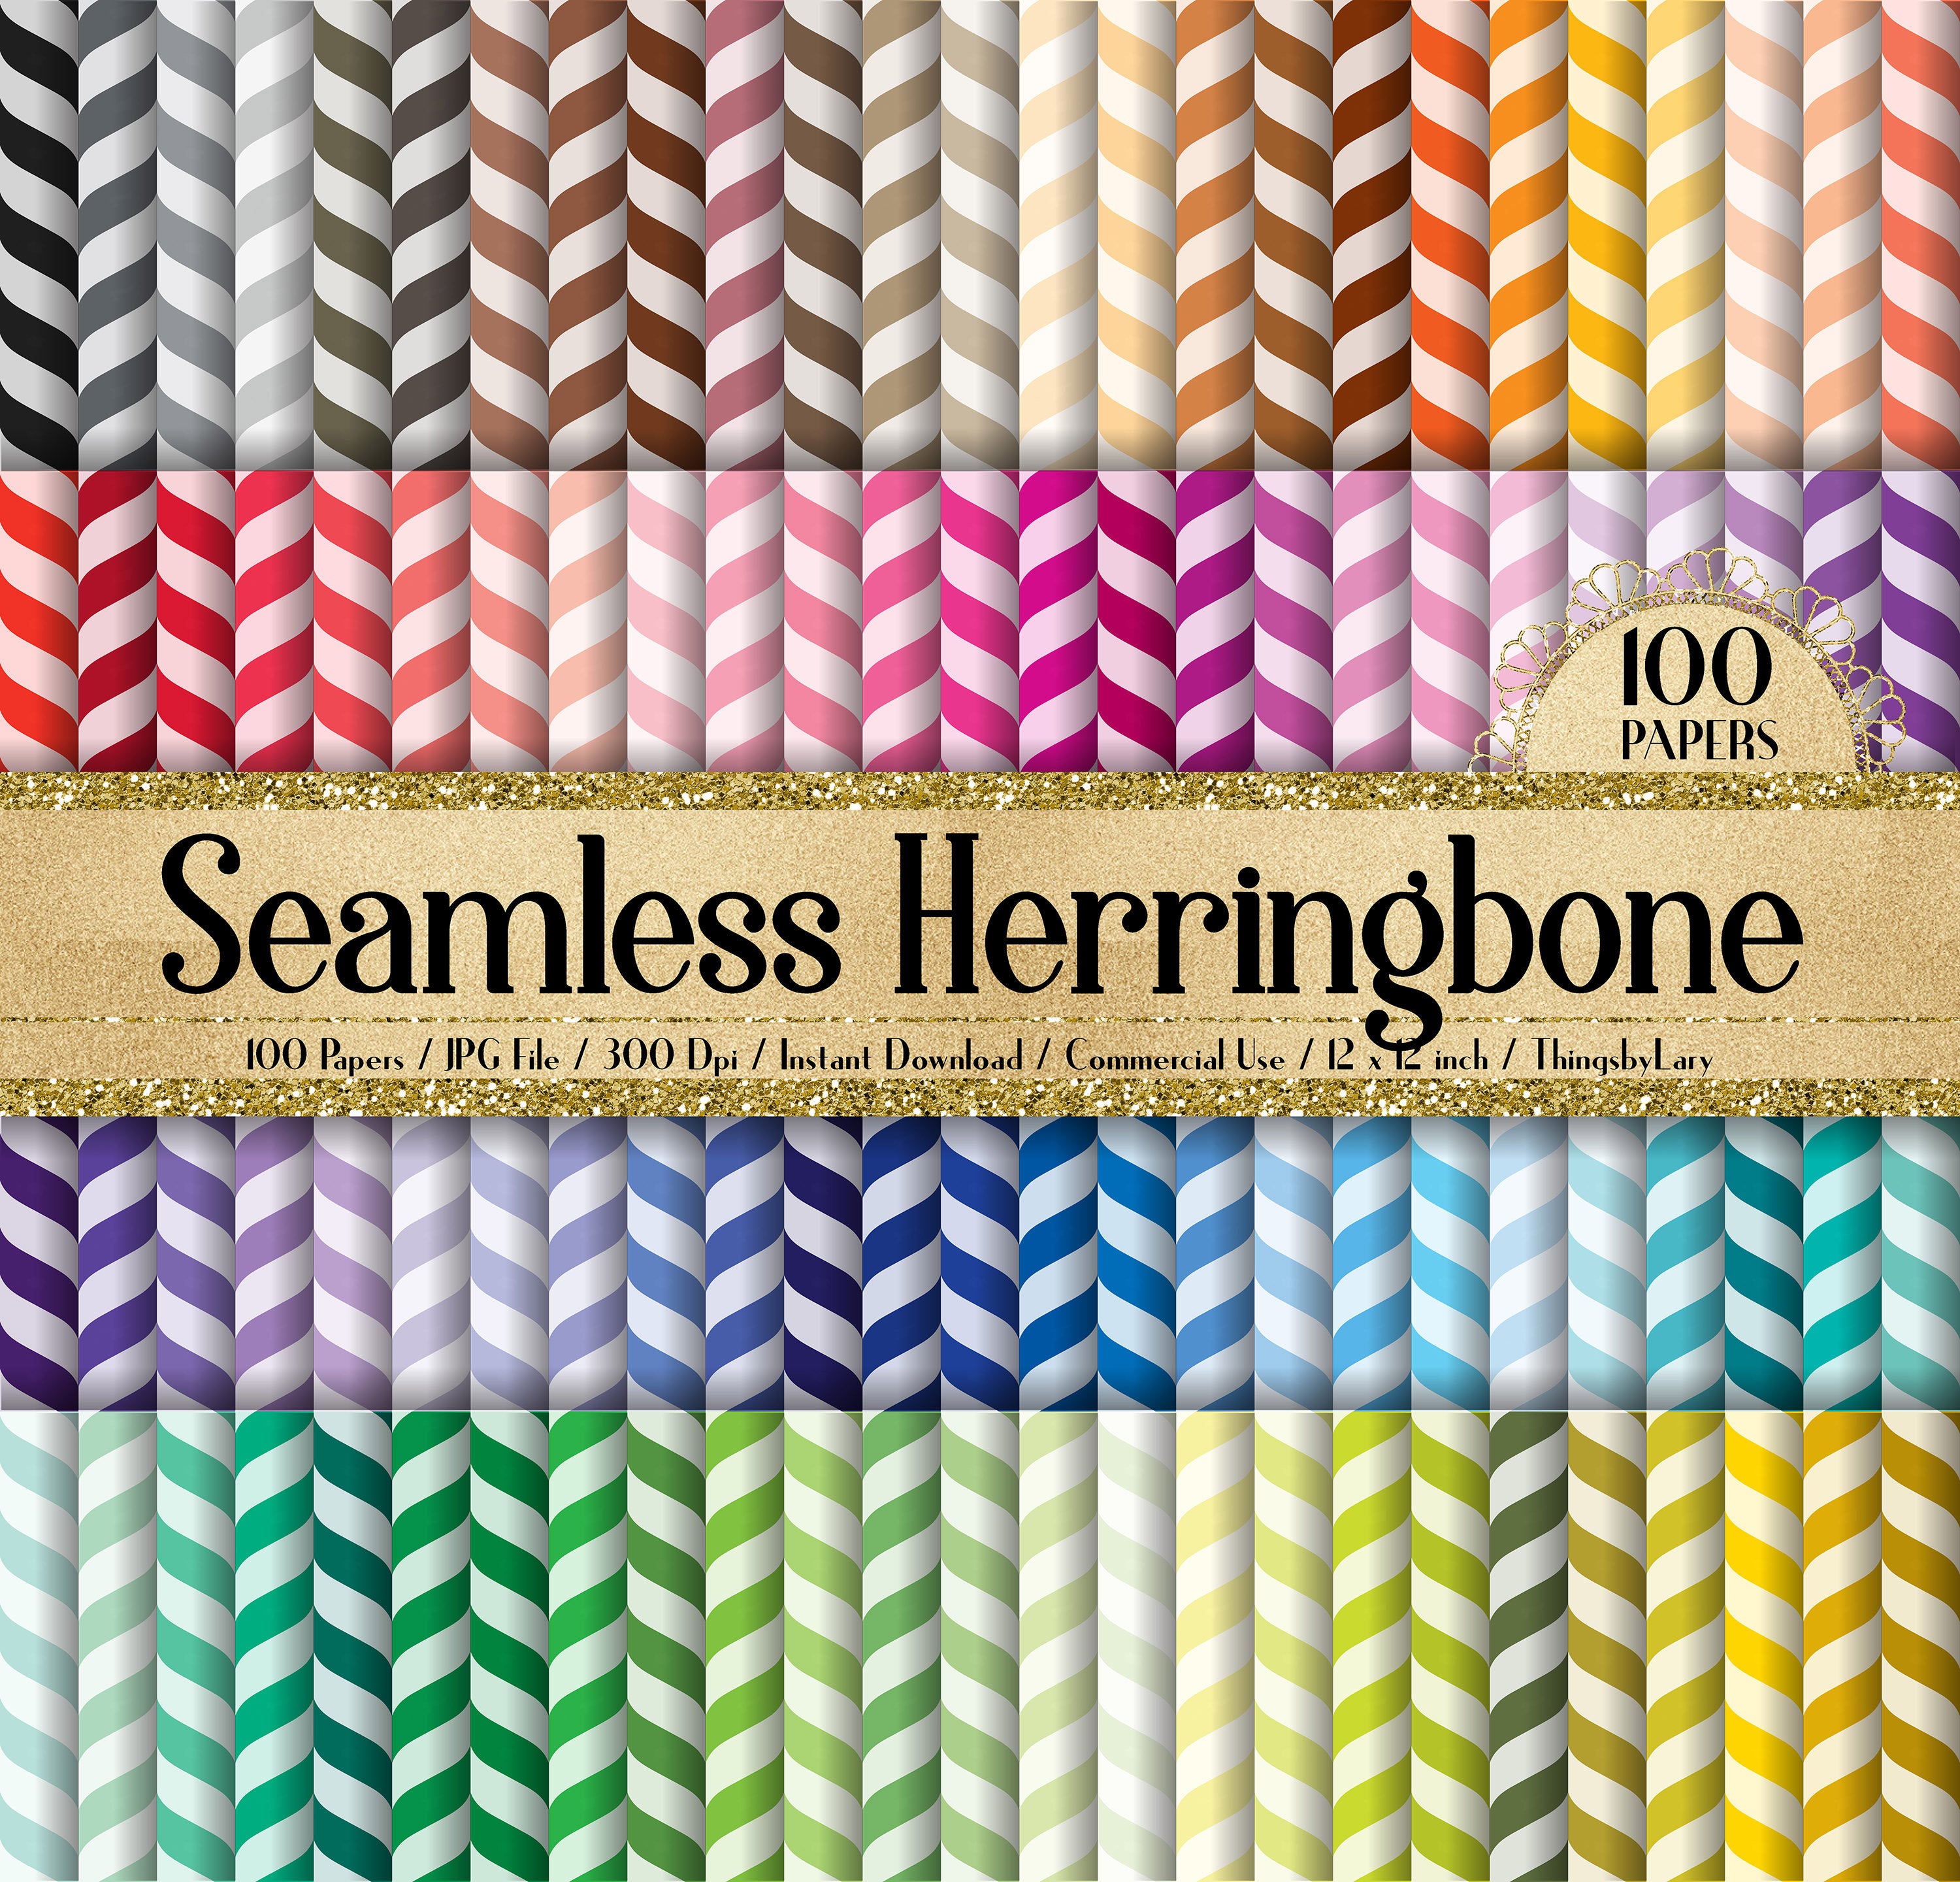 100 Seamless Herringbone Digital Papers 12x12&quot; 300 Dpi Commercial Use Instant Download Printable Chevron Canvas Journal Rainbow Fabric Print